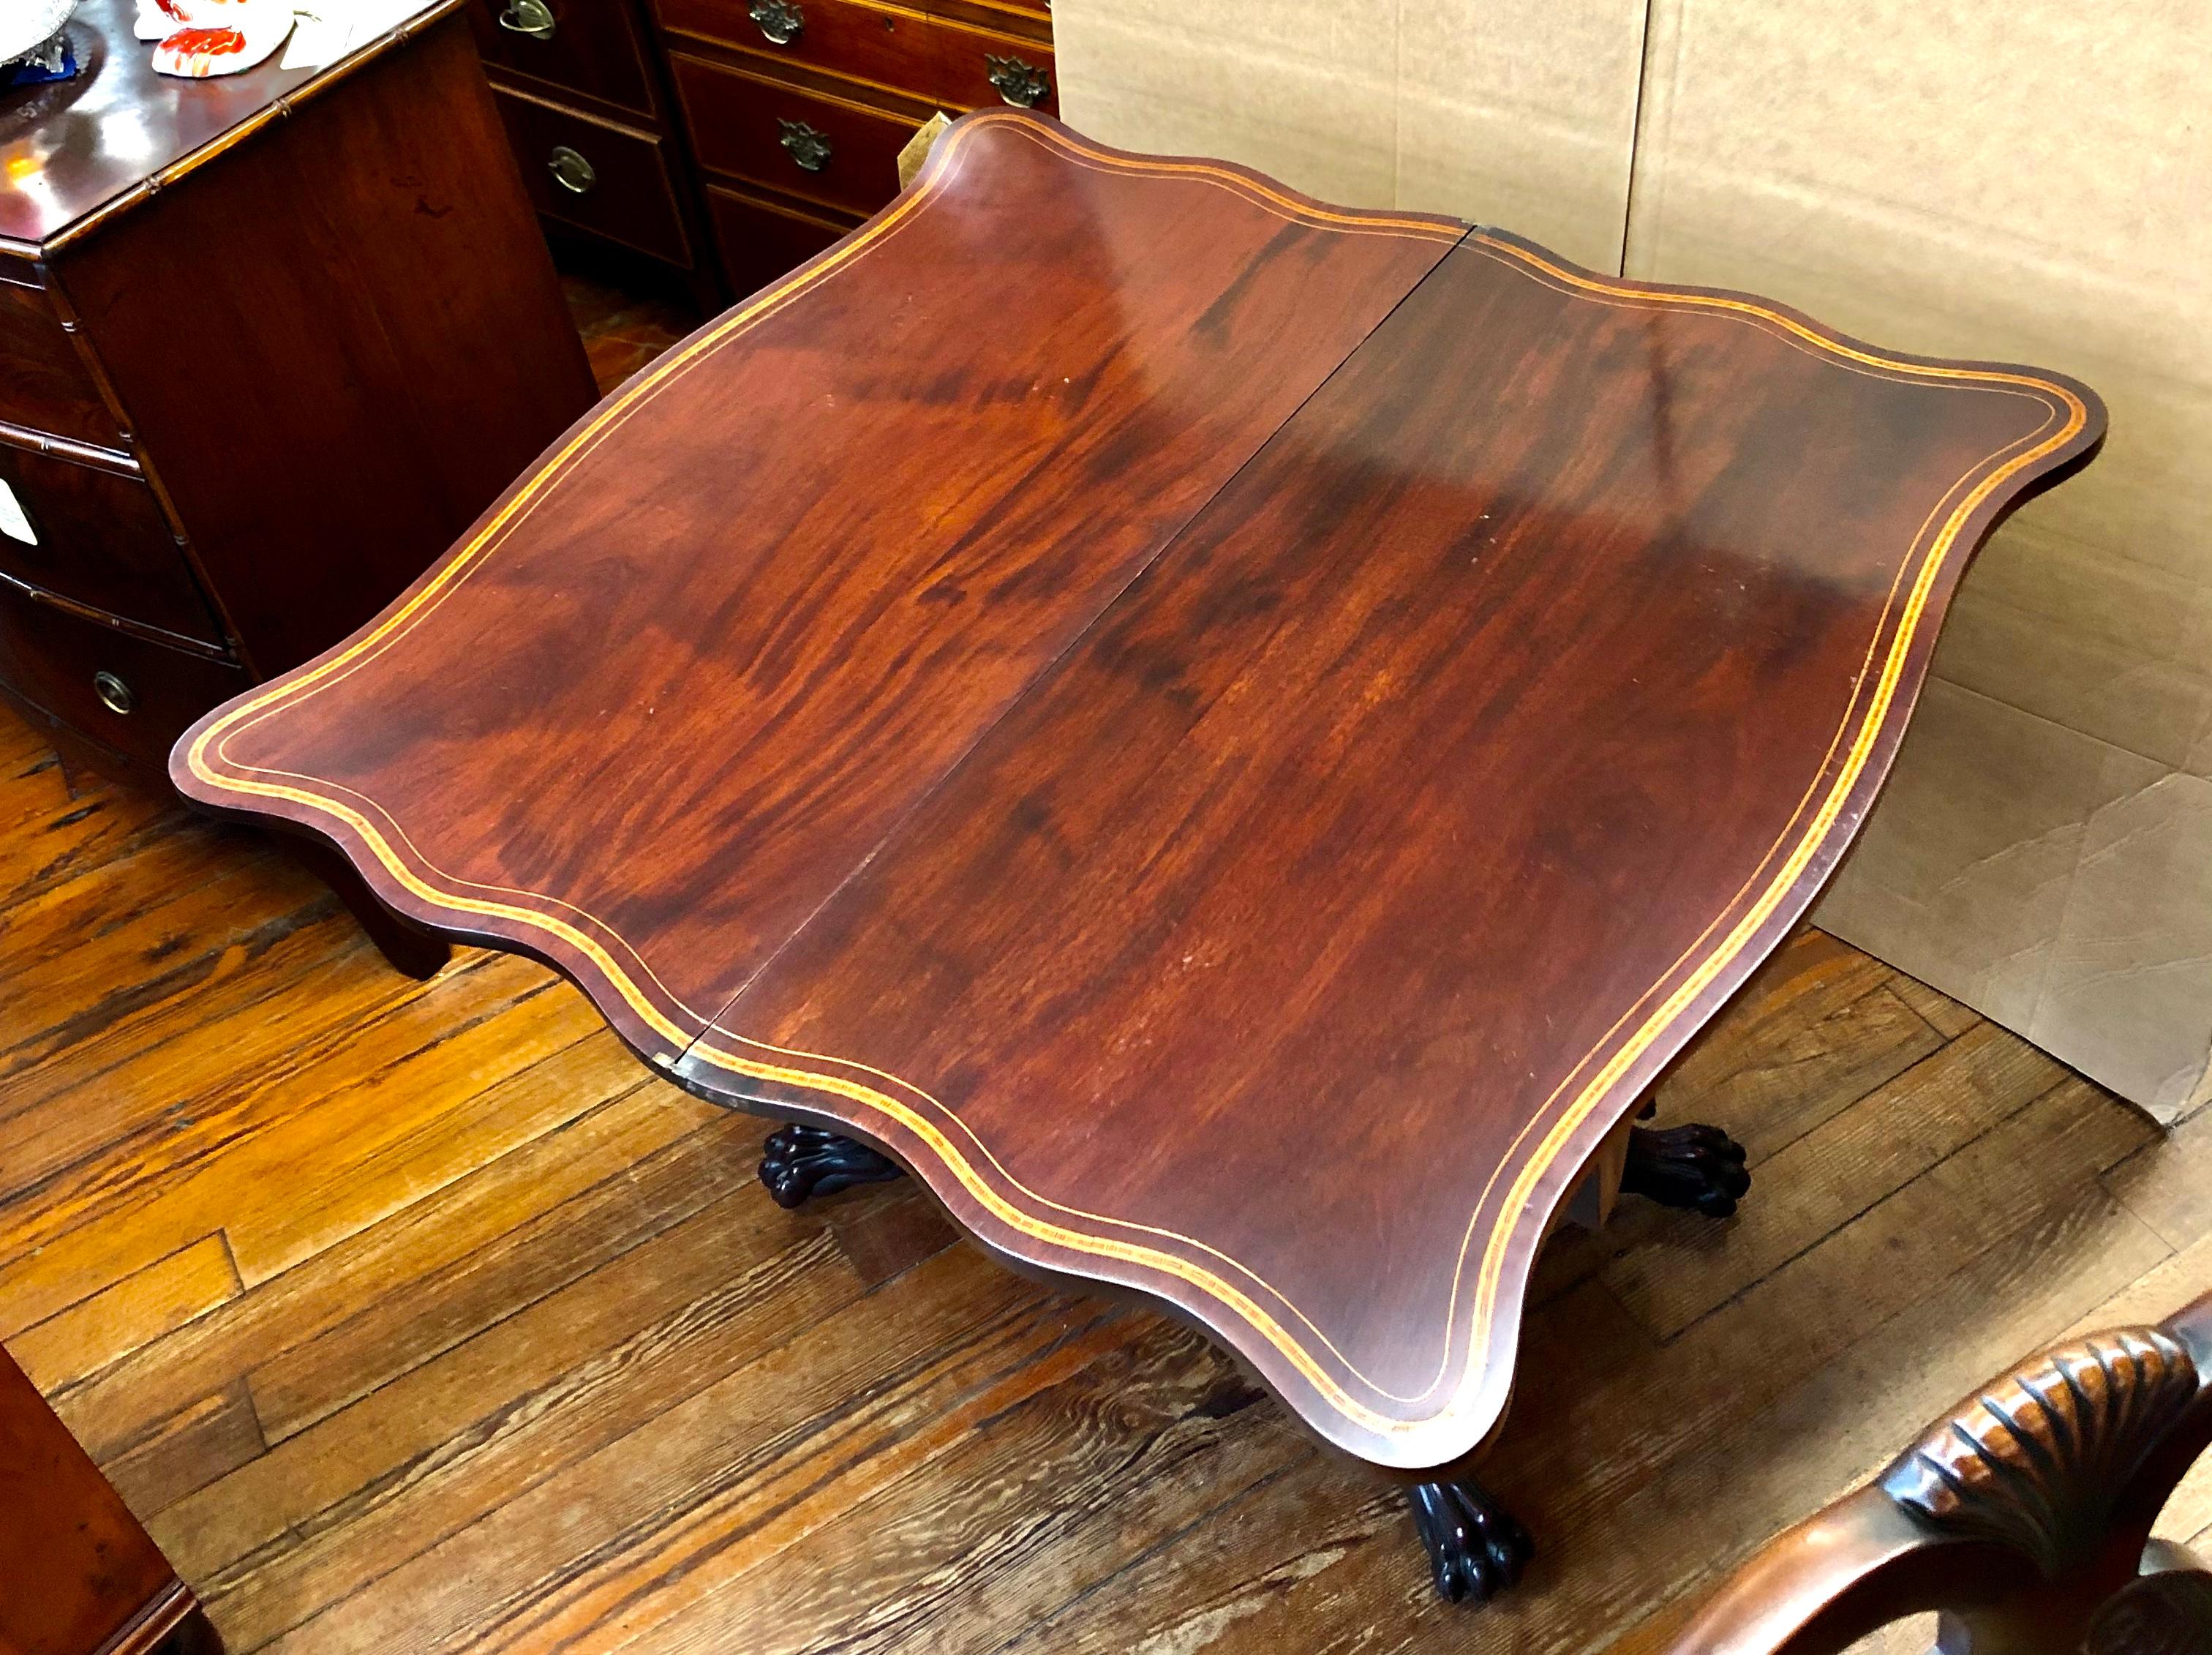 Possibly one of the finest late Federal or early Empire inlaid mahogany flap-top card or games tables; The table is serpentine in shape and attributed to having been made in a prominent unknown New York cabinetmaking shop, possibly influenced by the